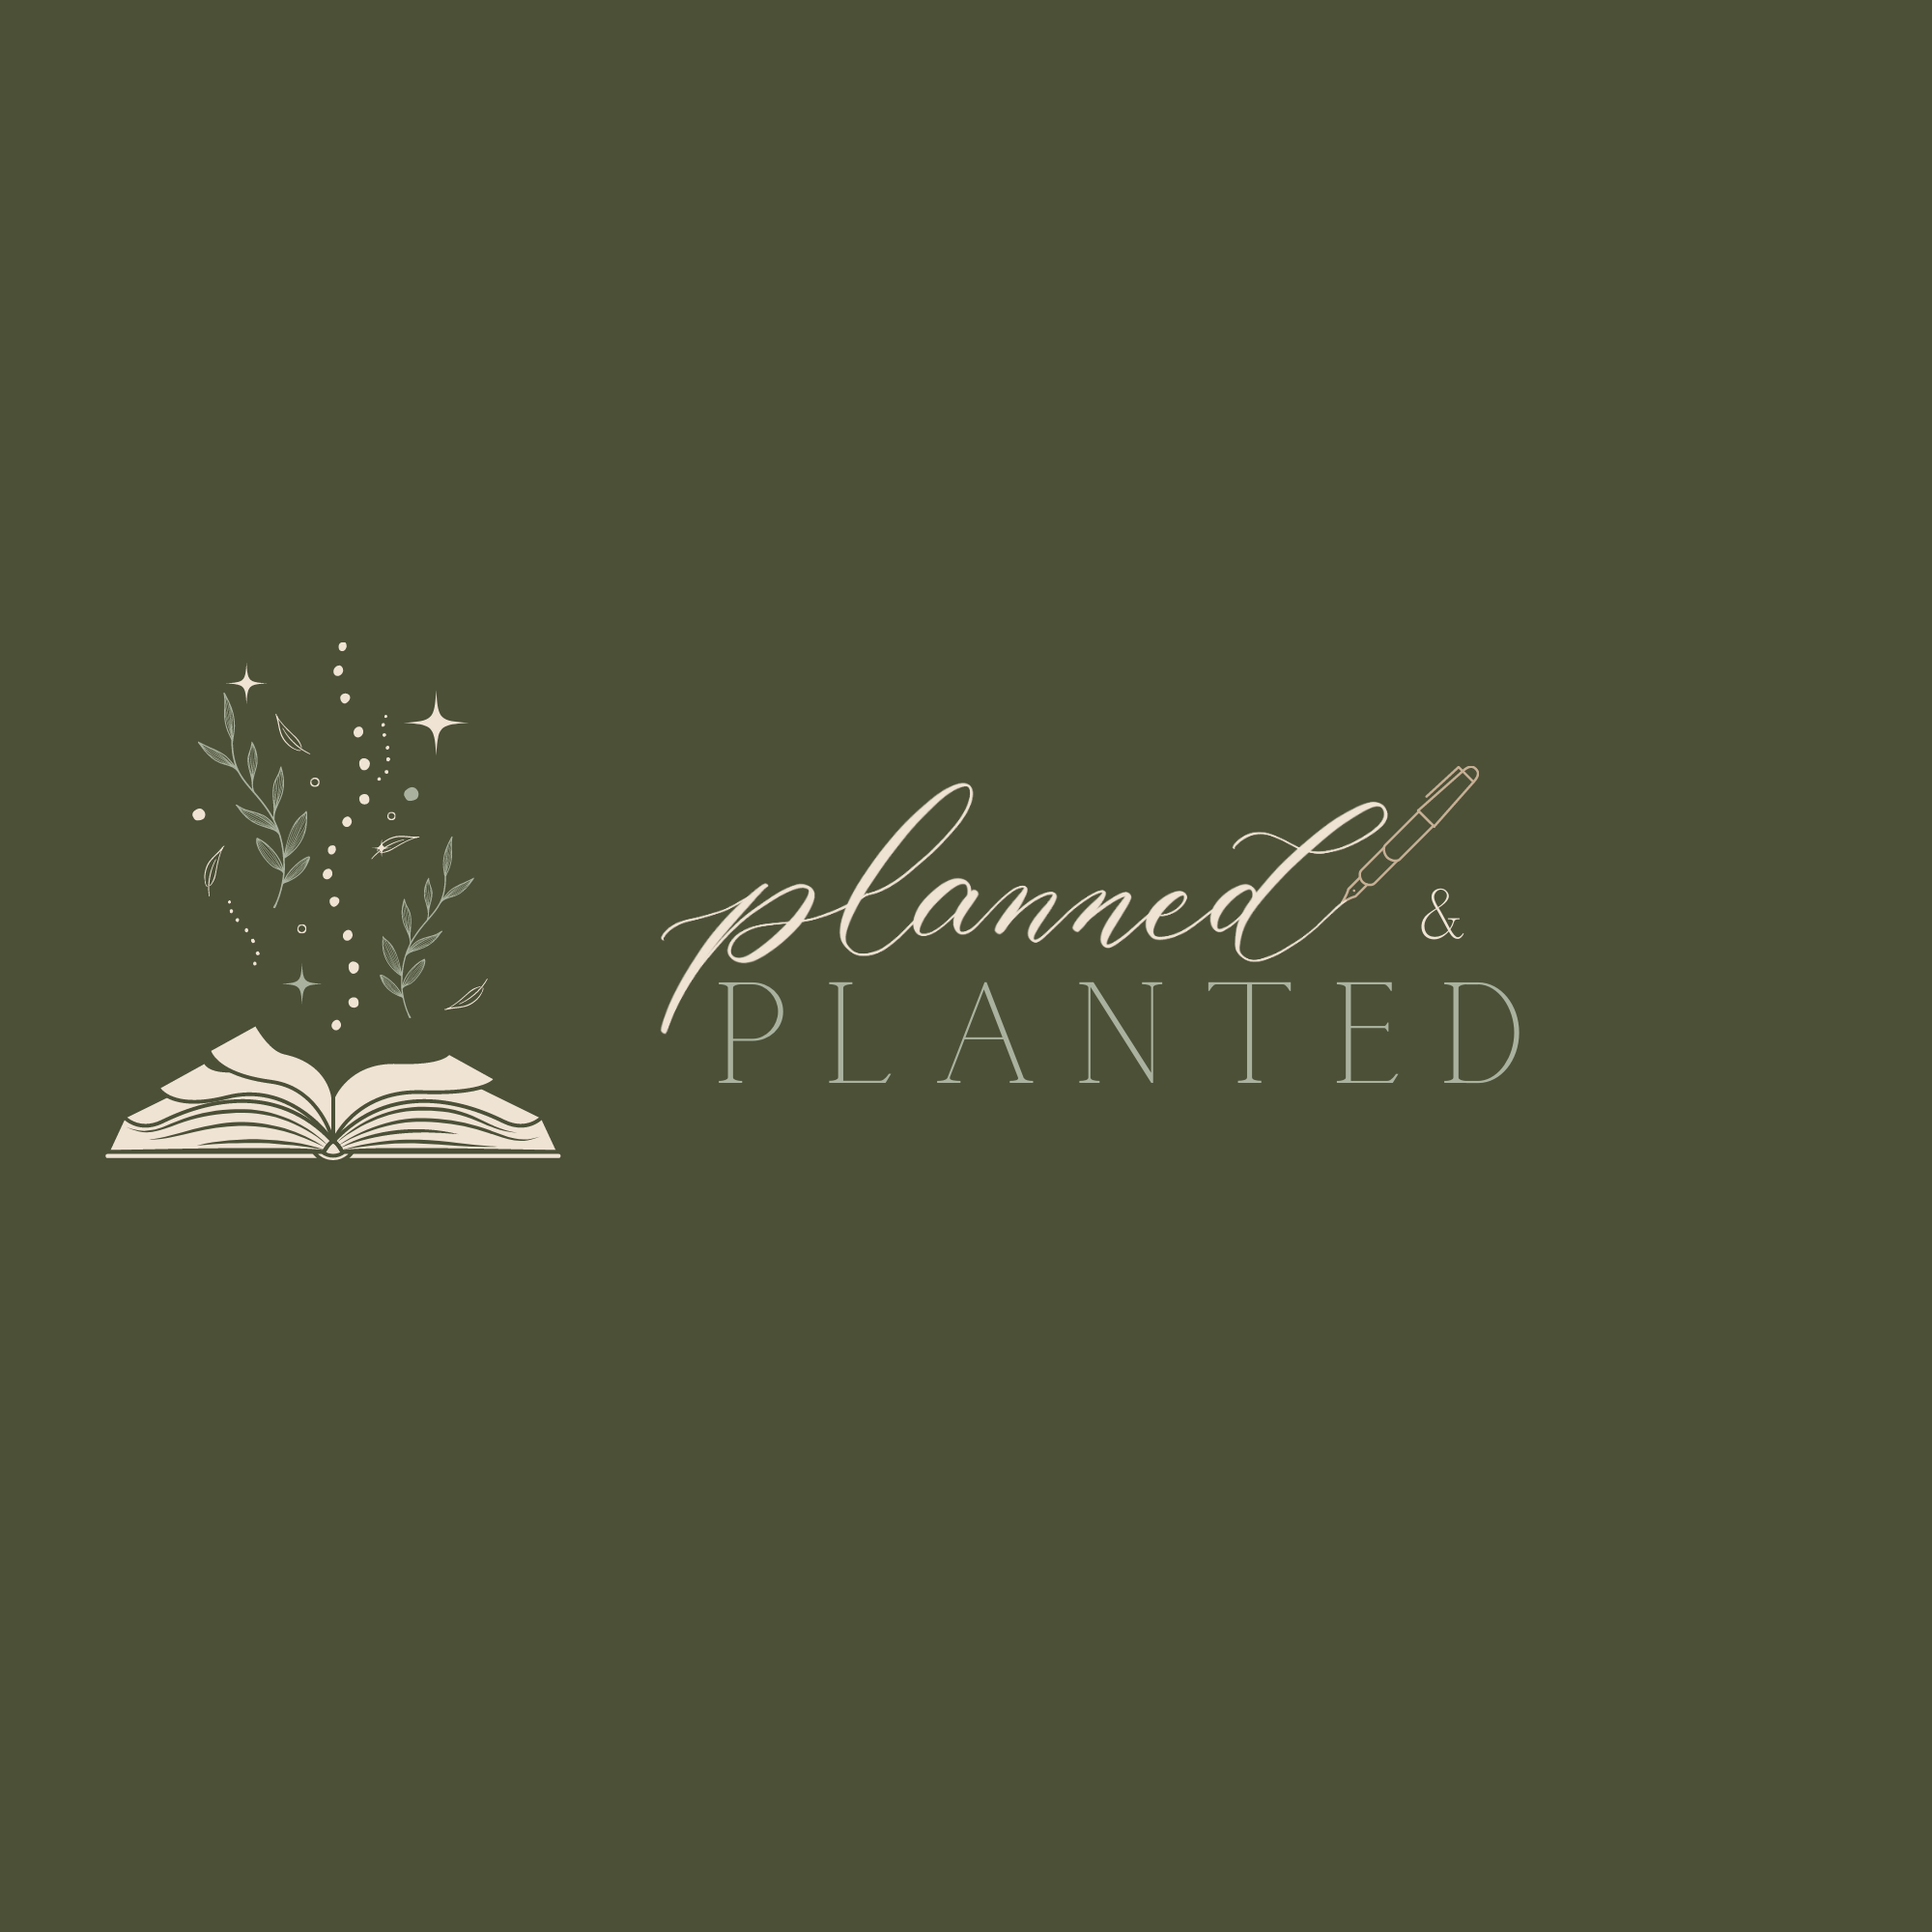 All Journaling Blog Posts - Planned & Planted